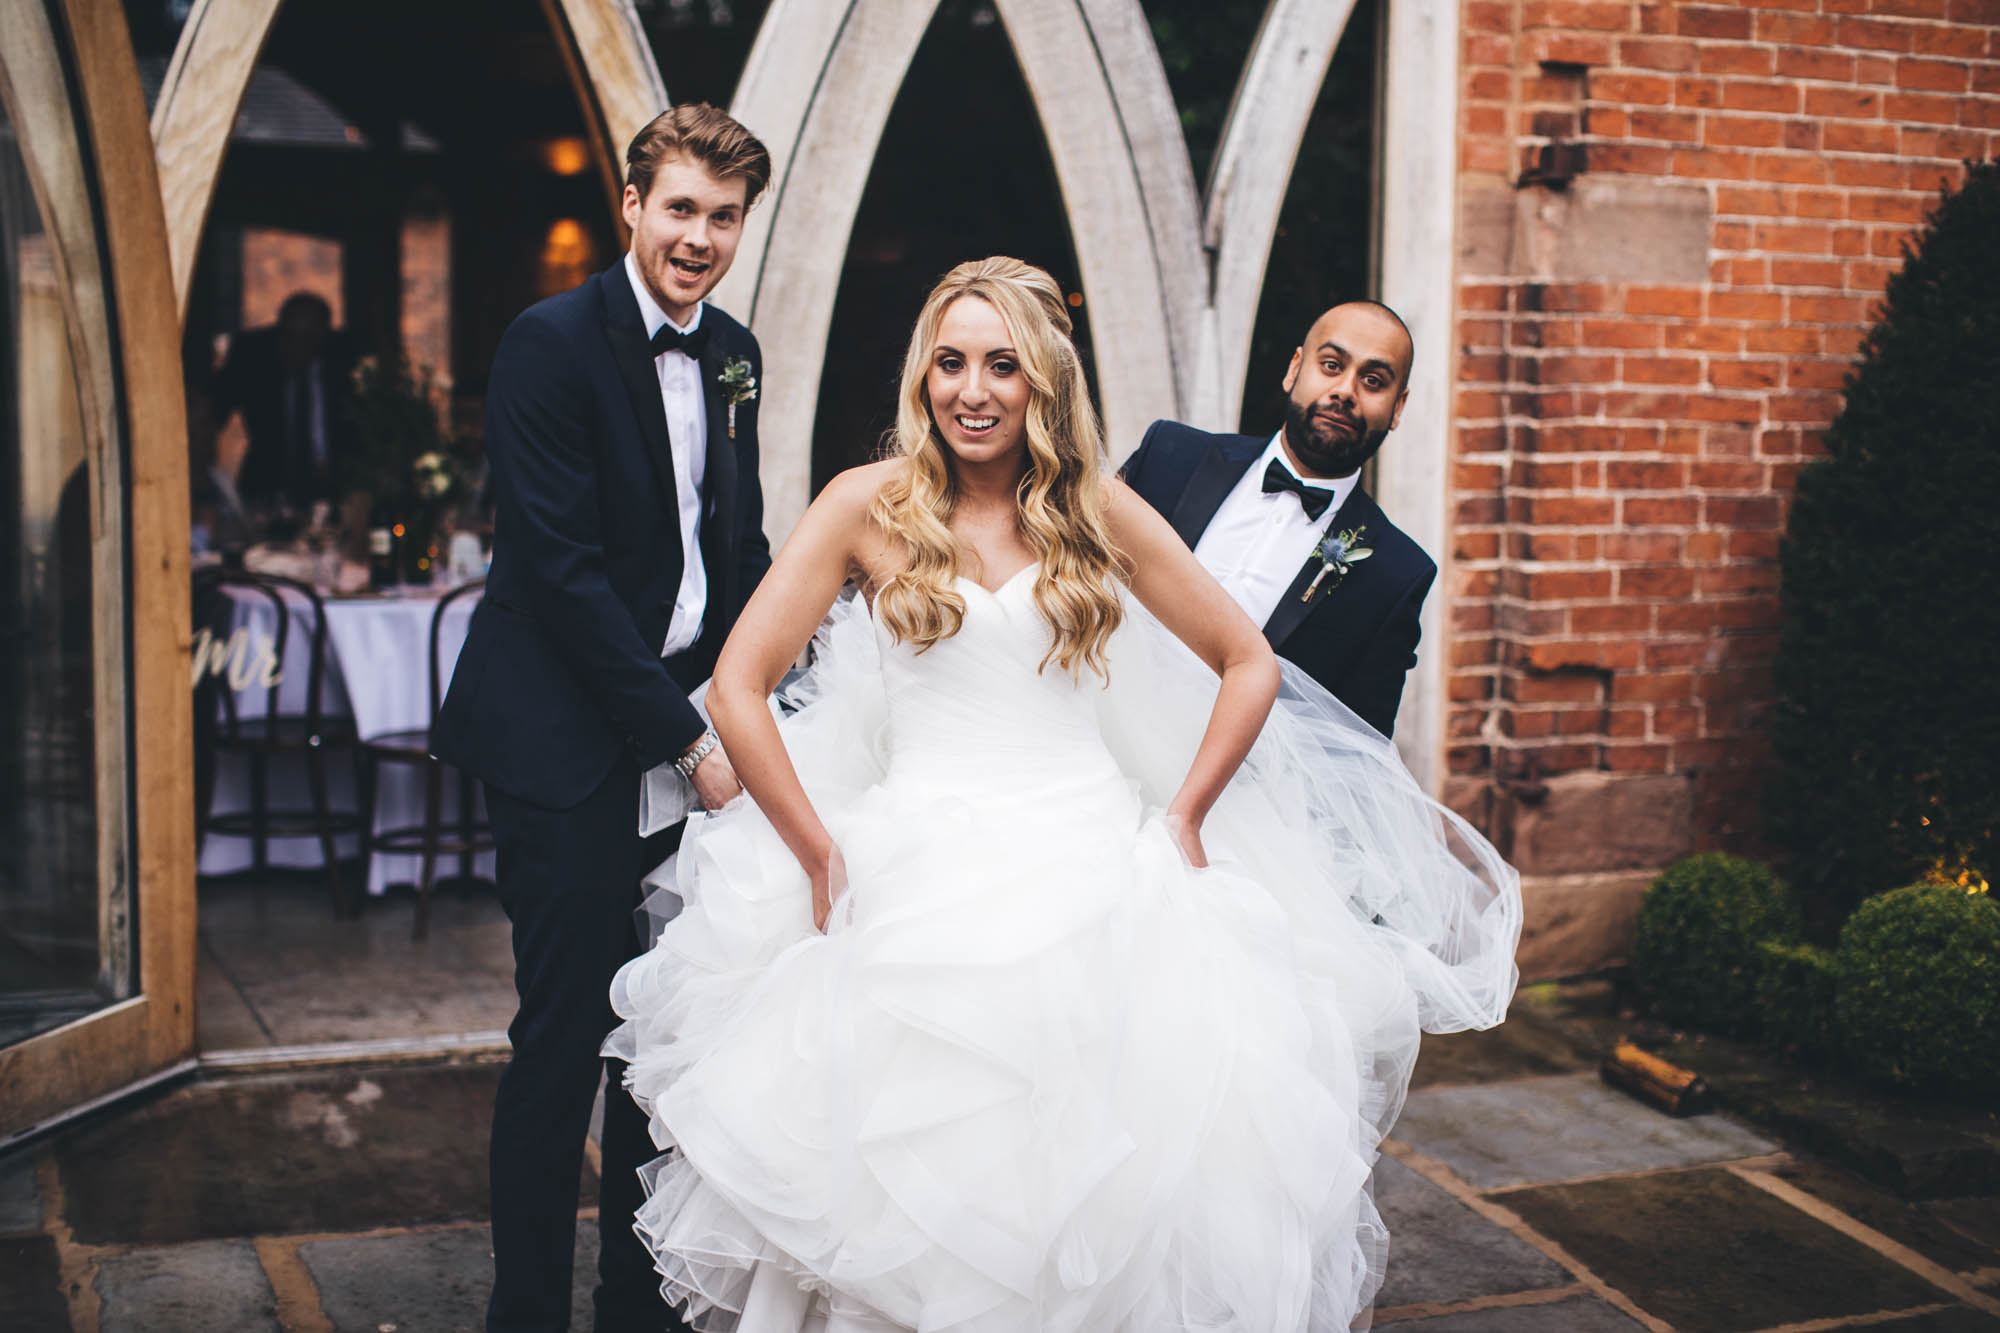 Groomsmen have banter as they help Bride with her wedding dress outside